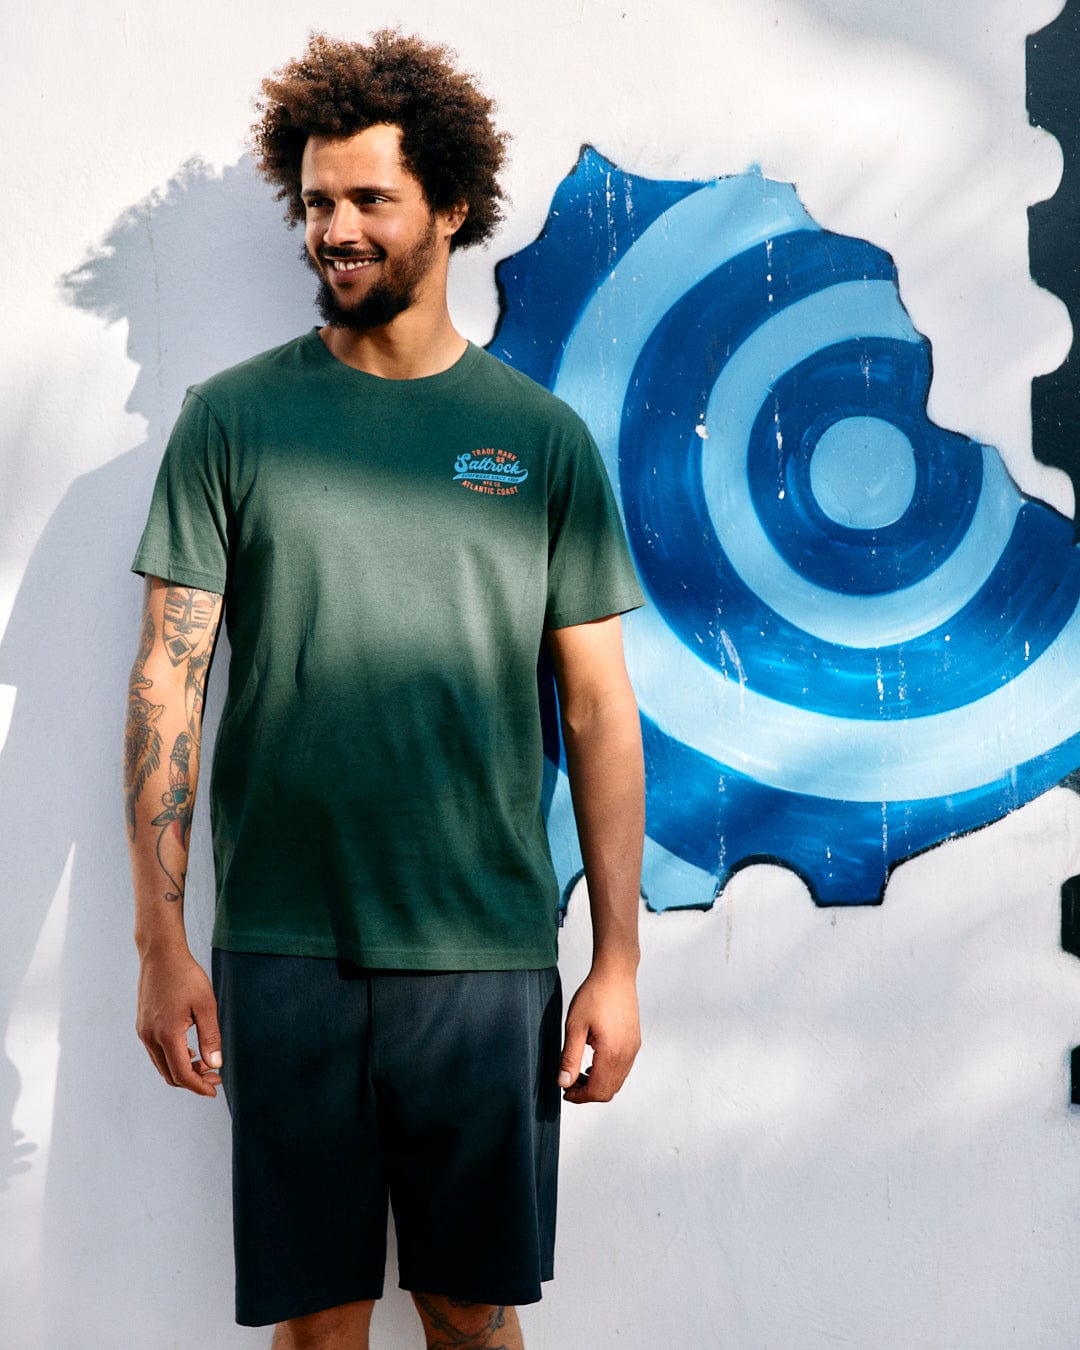 Smiling young man with curly hair, wearing a Saltrock Home Run Mens Short Sleeve T-Shirt in Dark Green and black shorts, standing in front of a wall with a blue abstract mural.